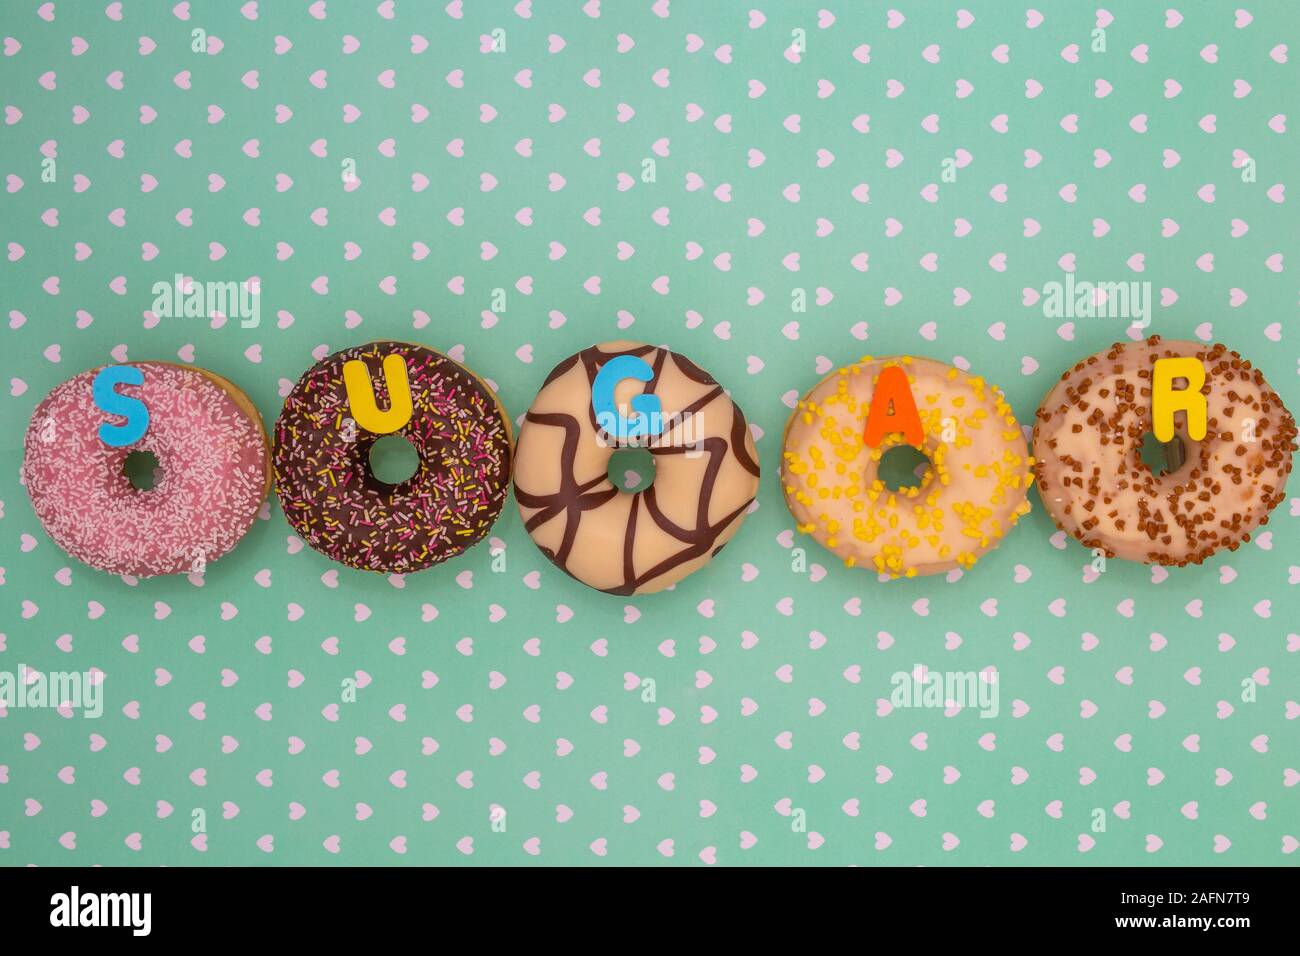 Group of delicious colorful glazed donuts near green background with white hearts pattern and the word sugar Stock Photo